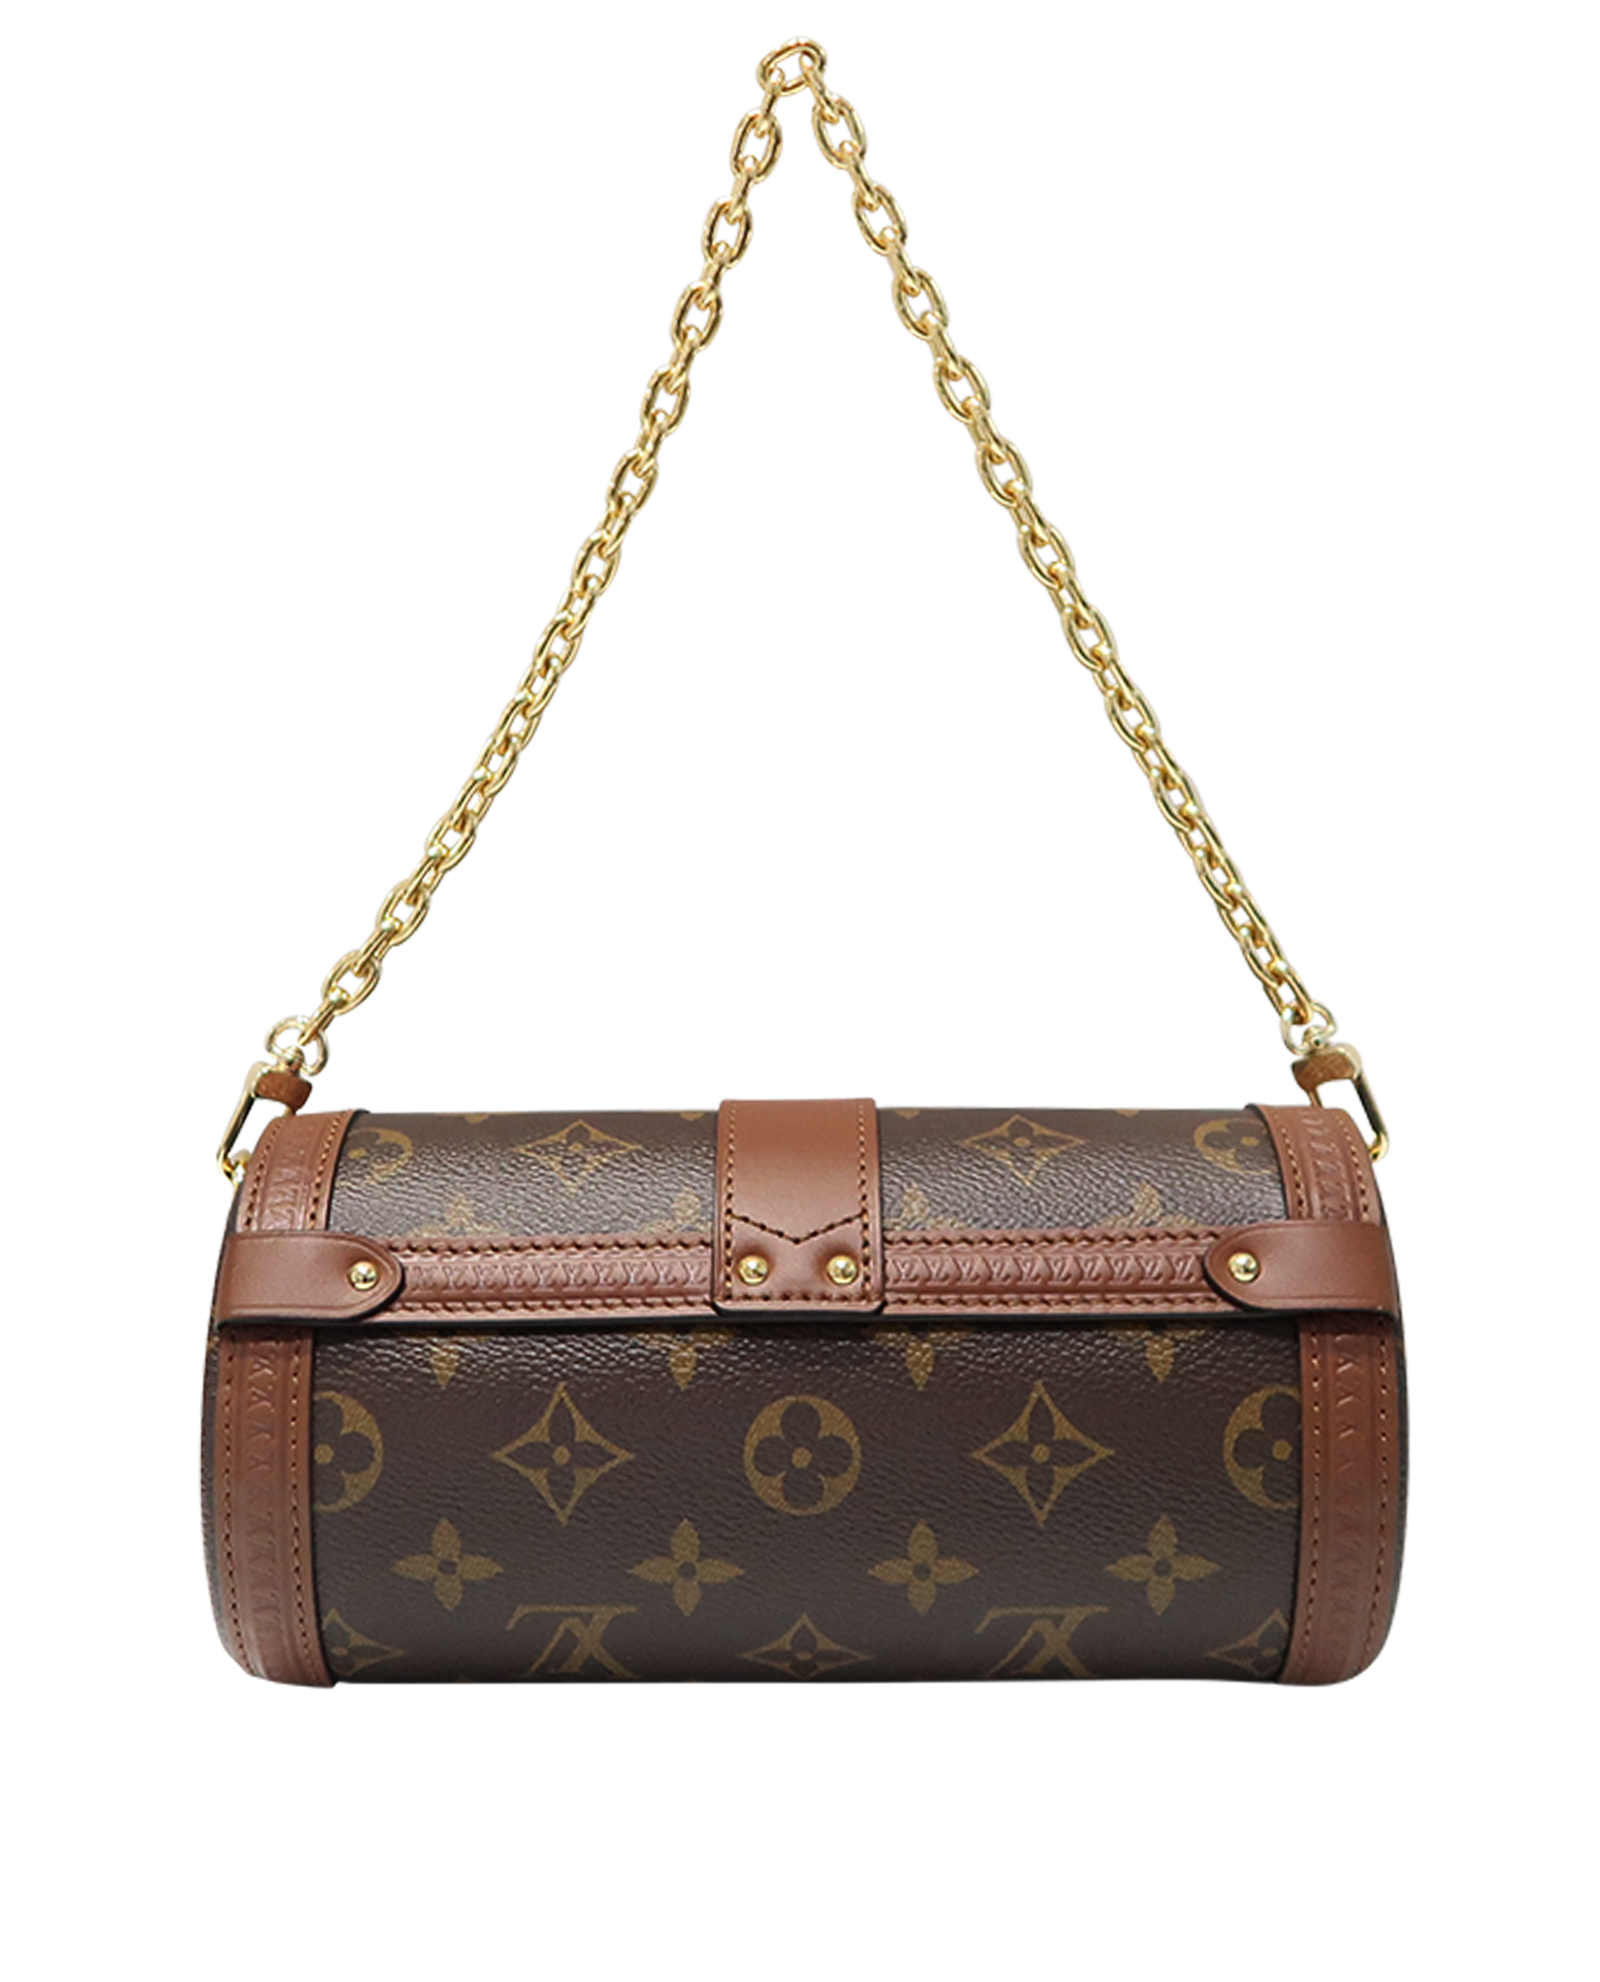 Am deciding on my first ever LV bag. Would the papillon trunk in